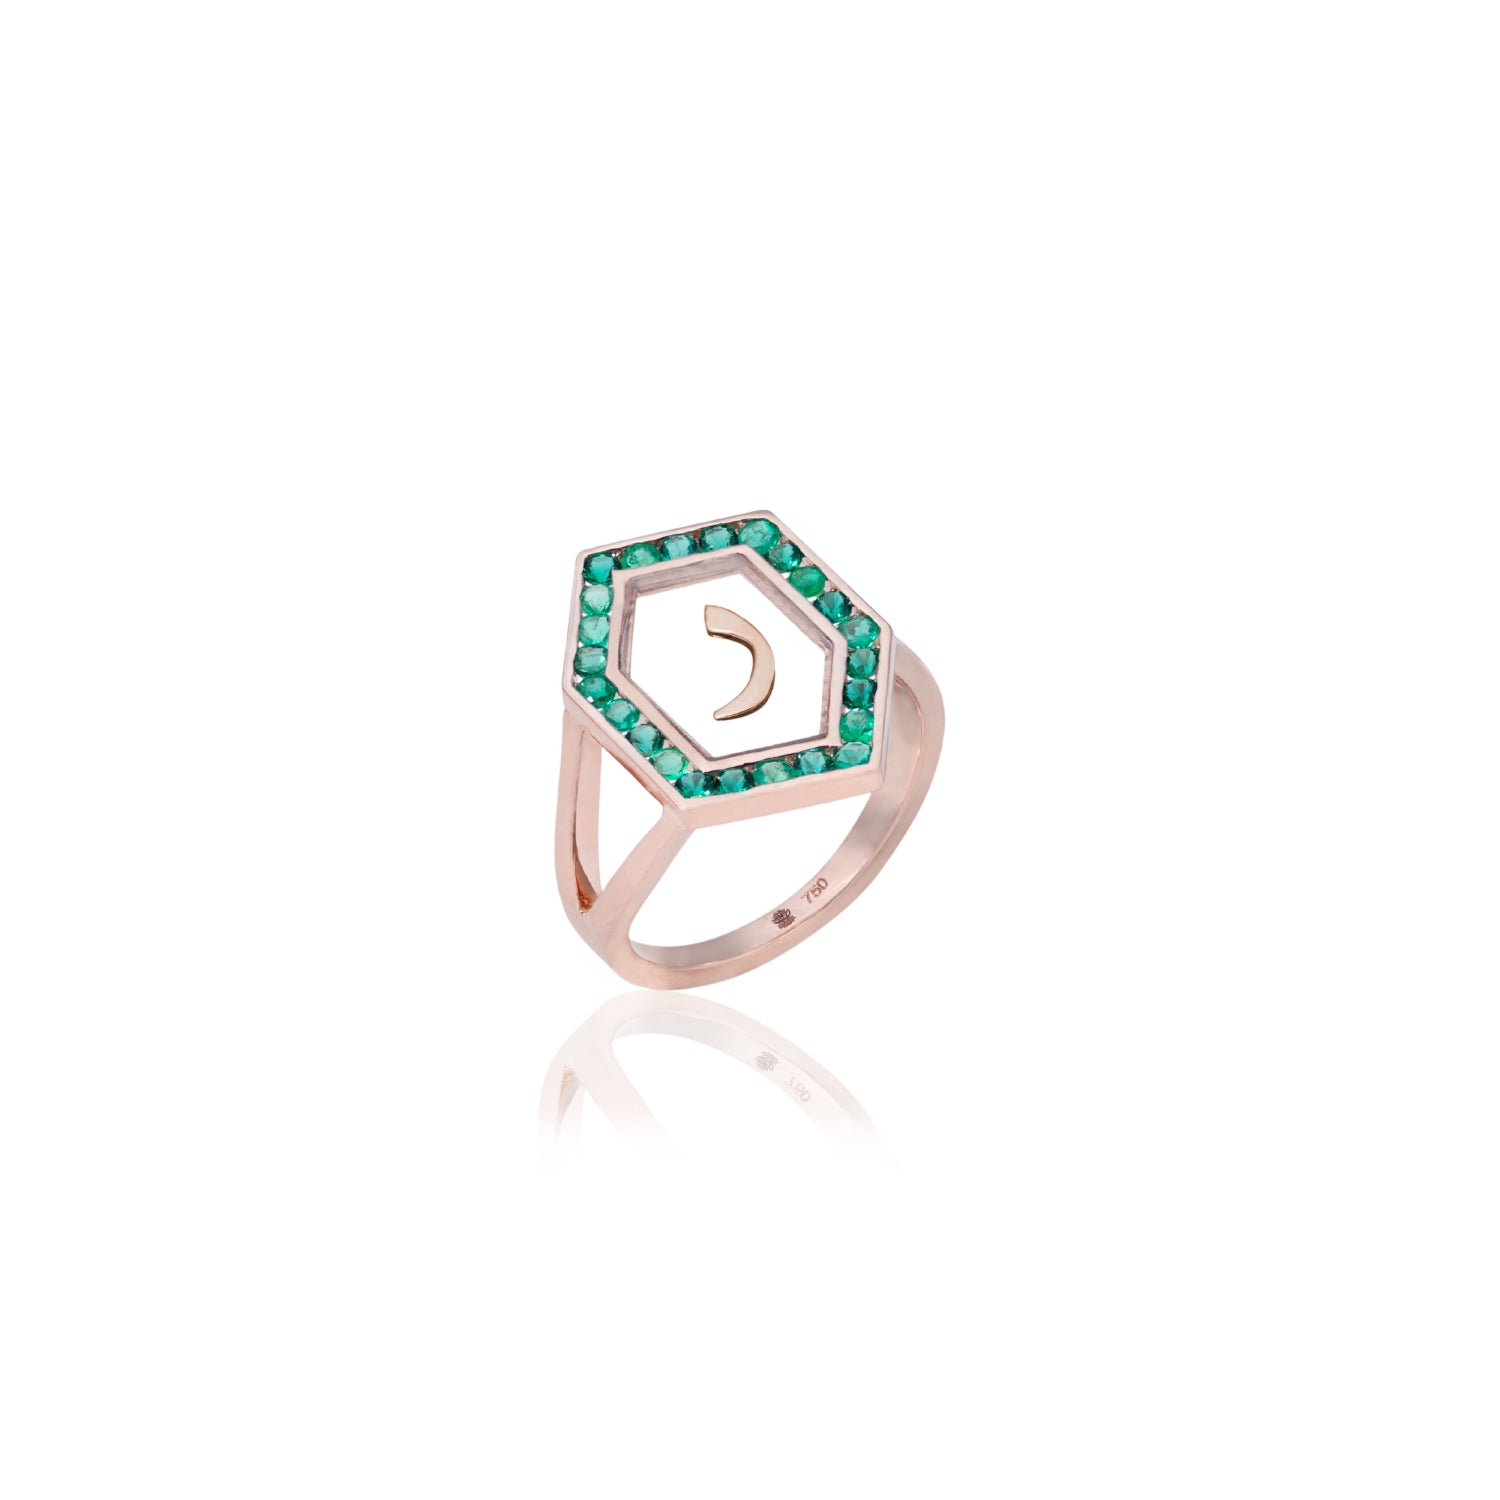 Qamoos 1.0 Letter ر Emerald Ring in Rose Gold